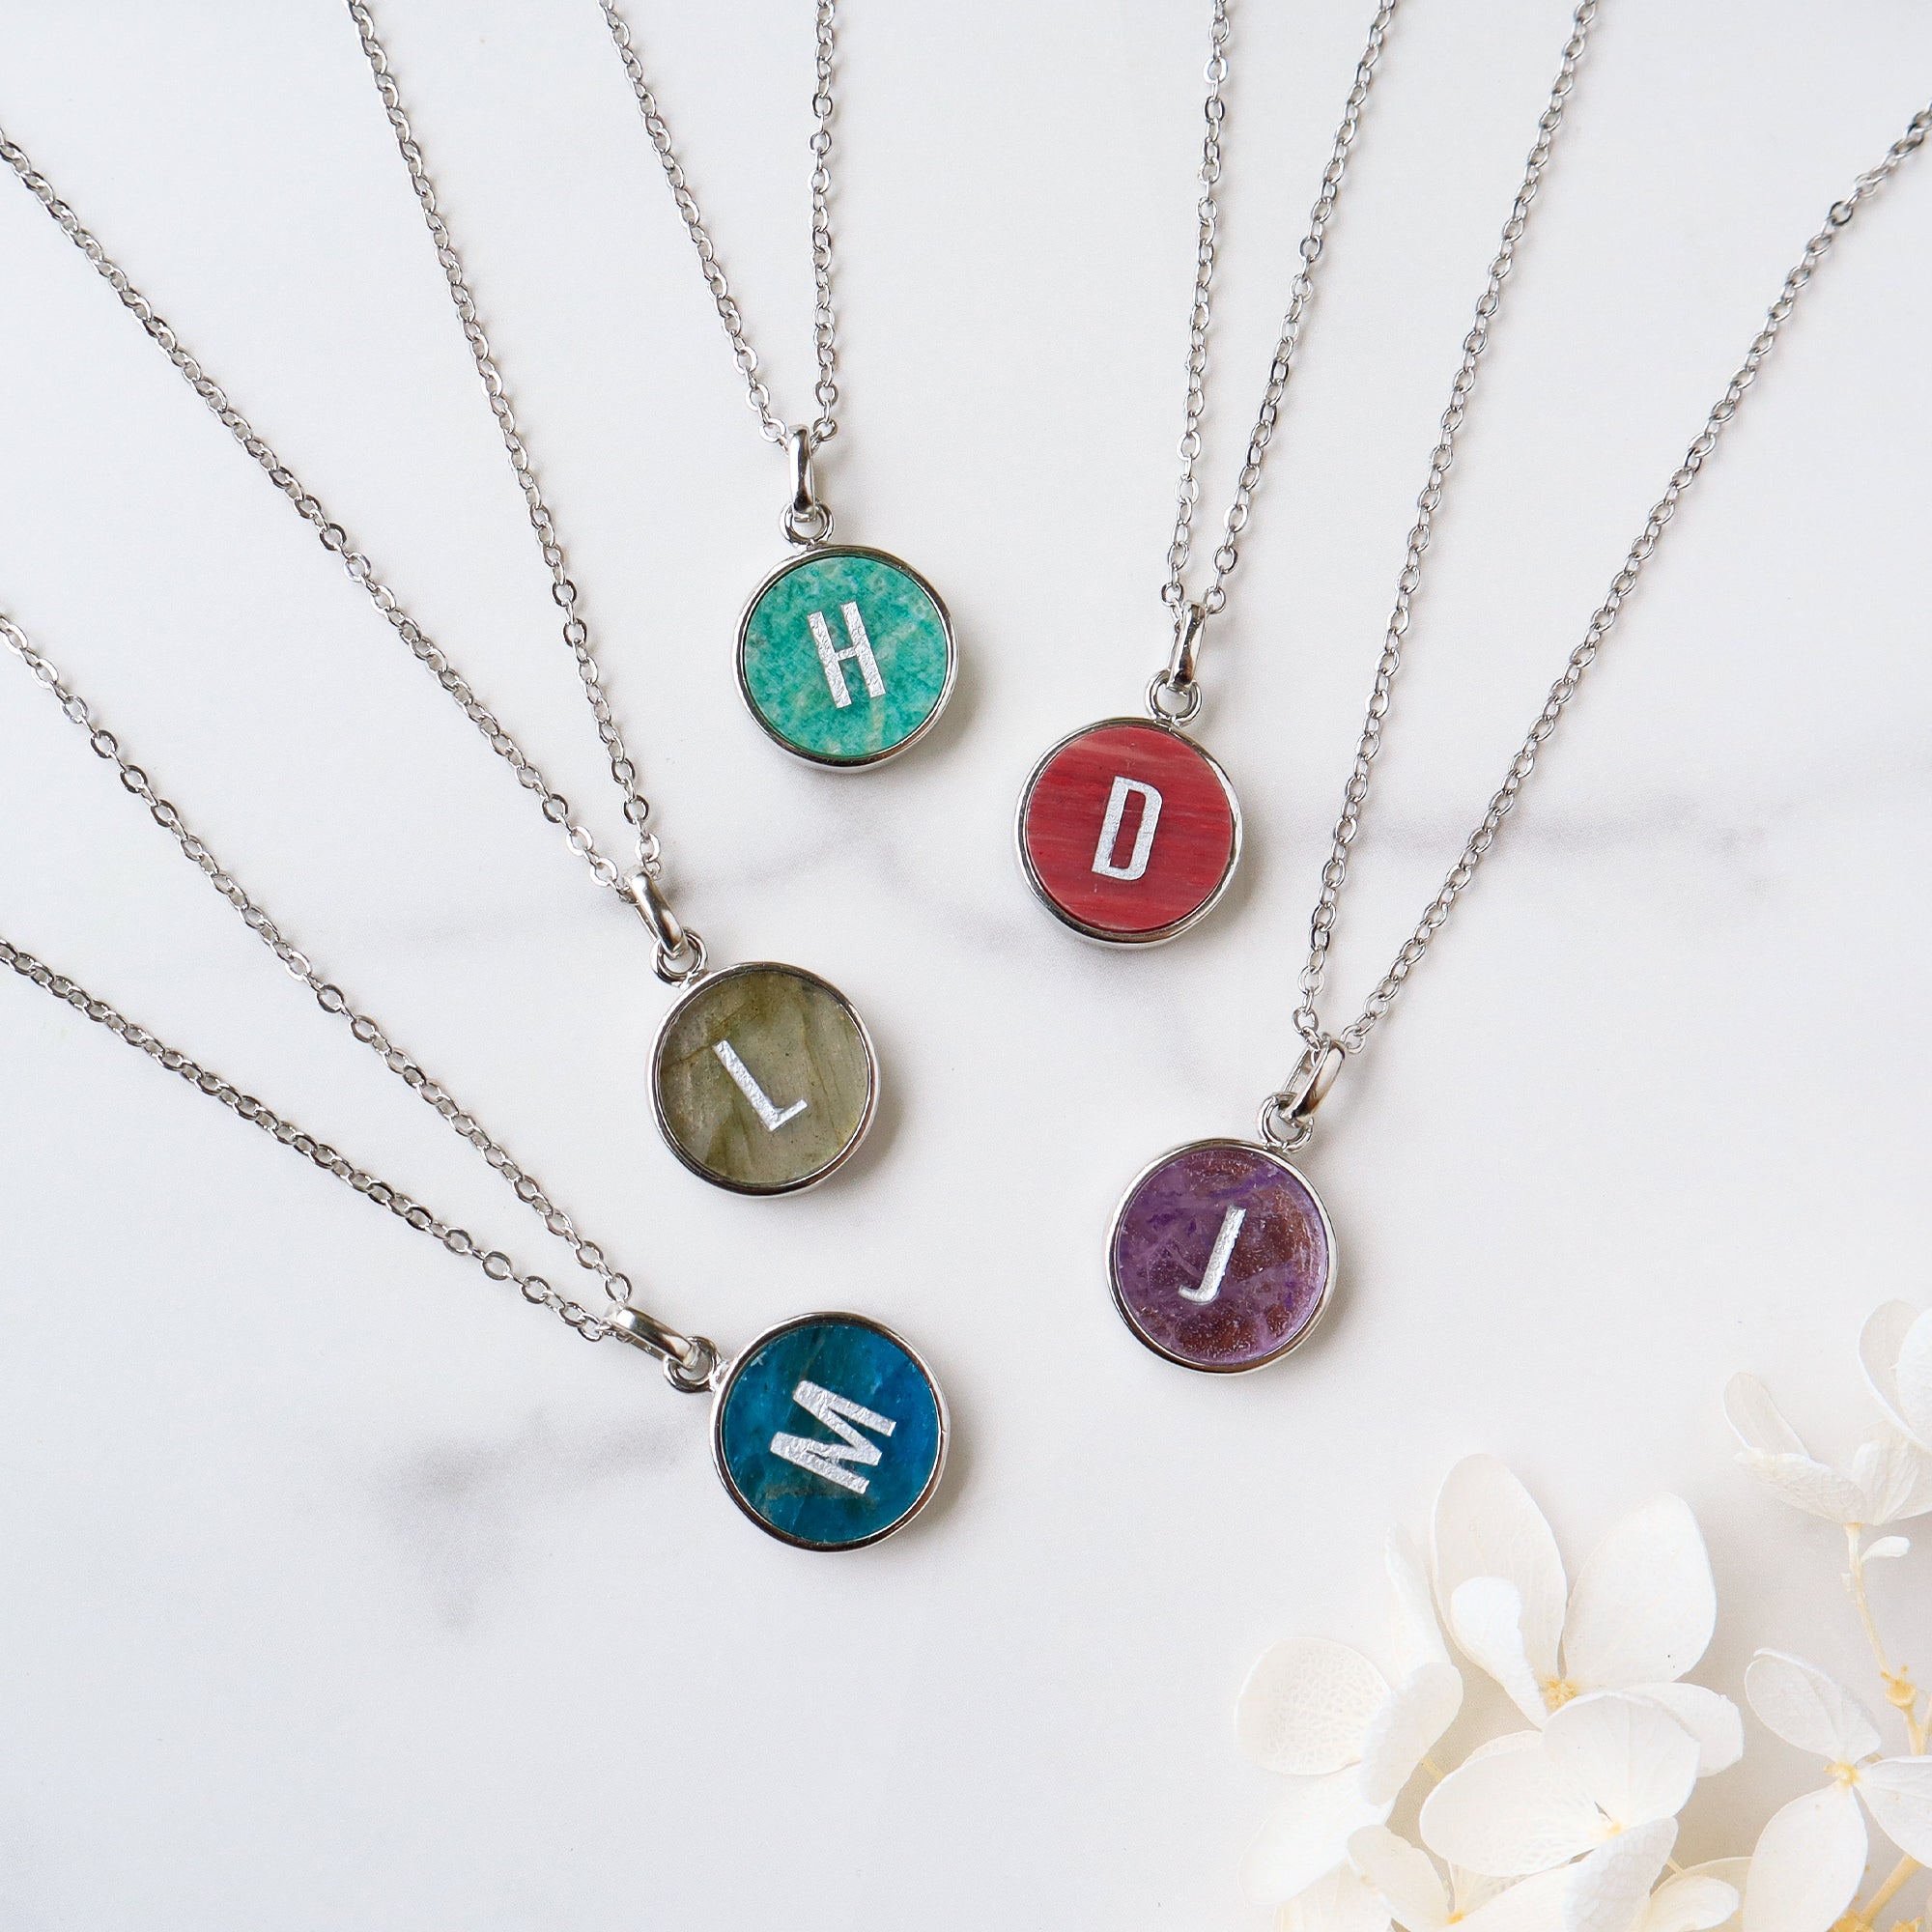 16" Silver Plated Round Gemstone Carved Initial Letter Necklace, Natural Amazonite Rose Quartz Aquamarine Labradorite Turquoise Necklace, Healing Jewelry KZ035